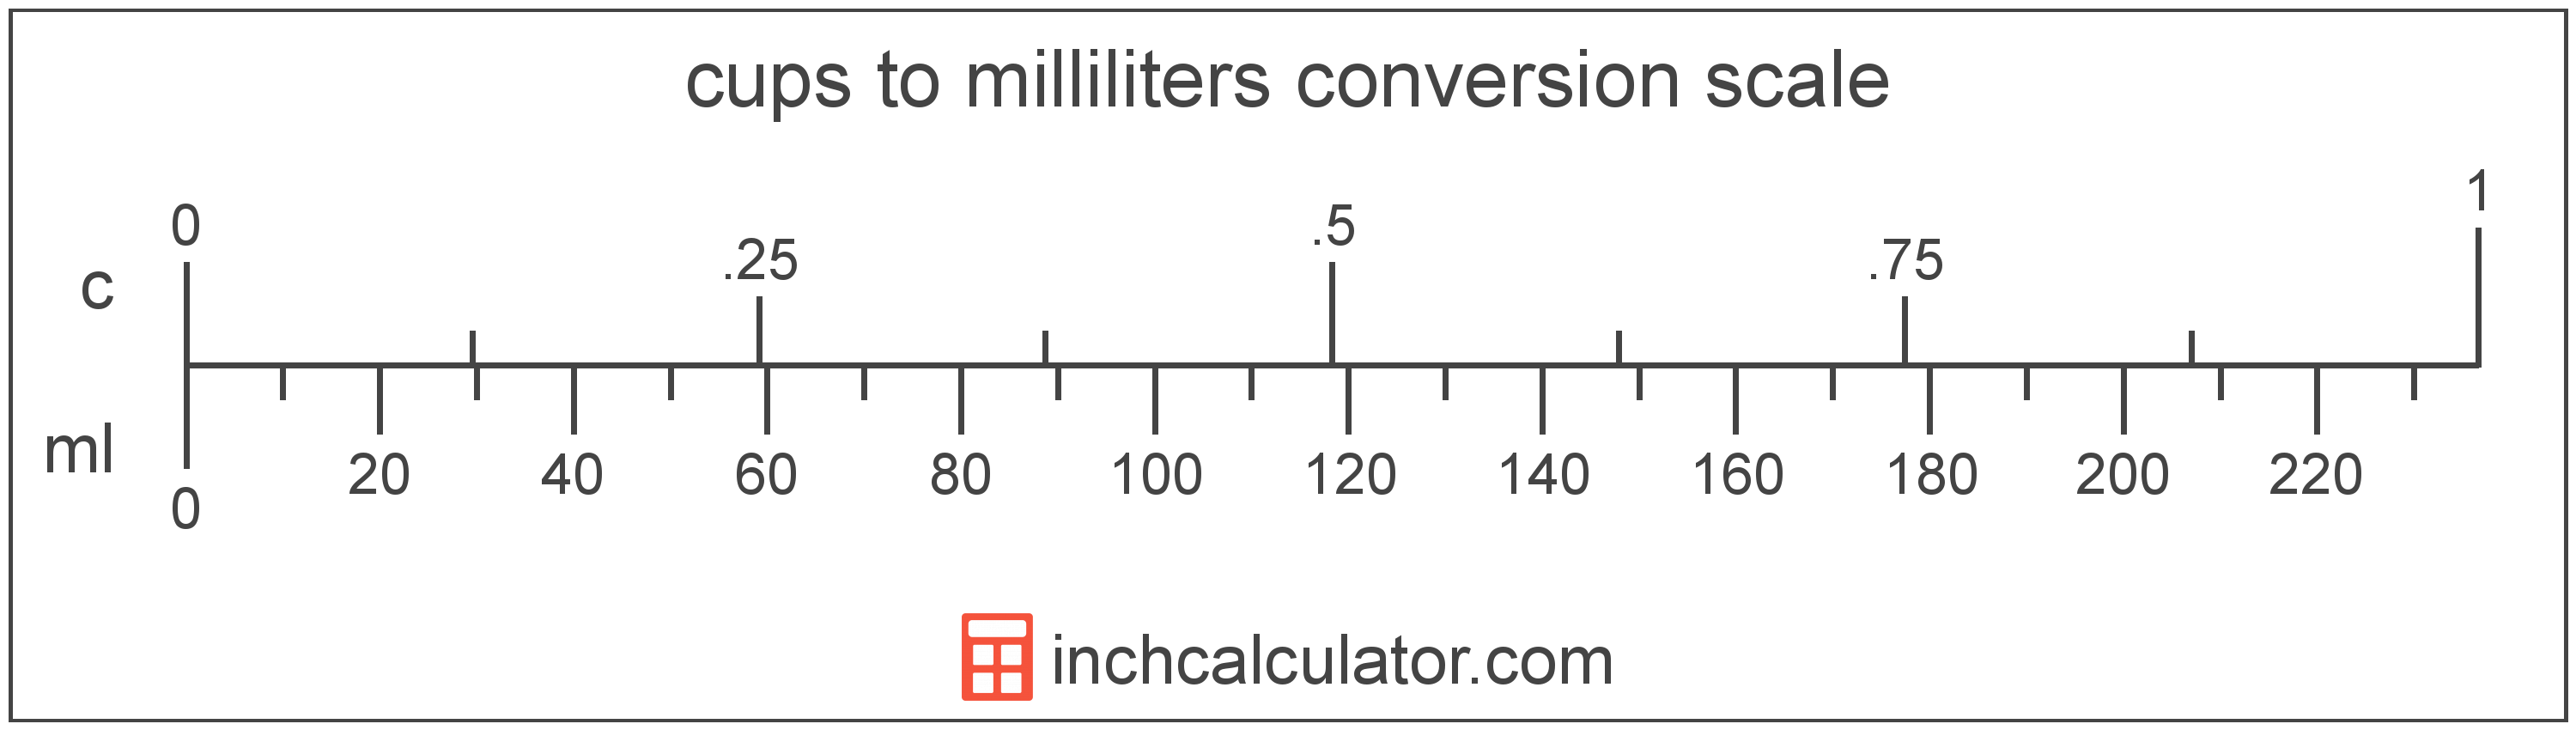 Cups to Milliliters Conversion (c to ml) - Inch Calculator